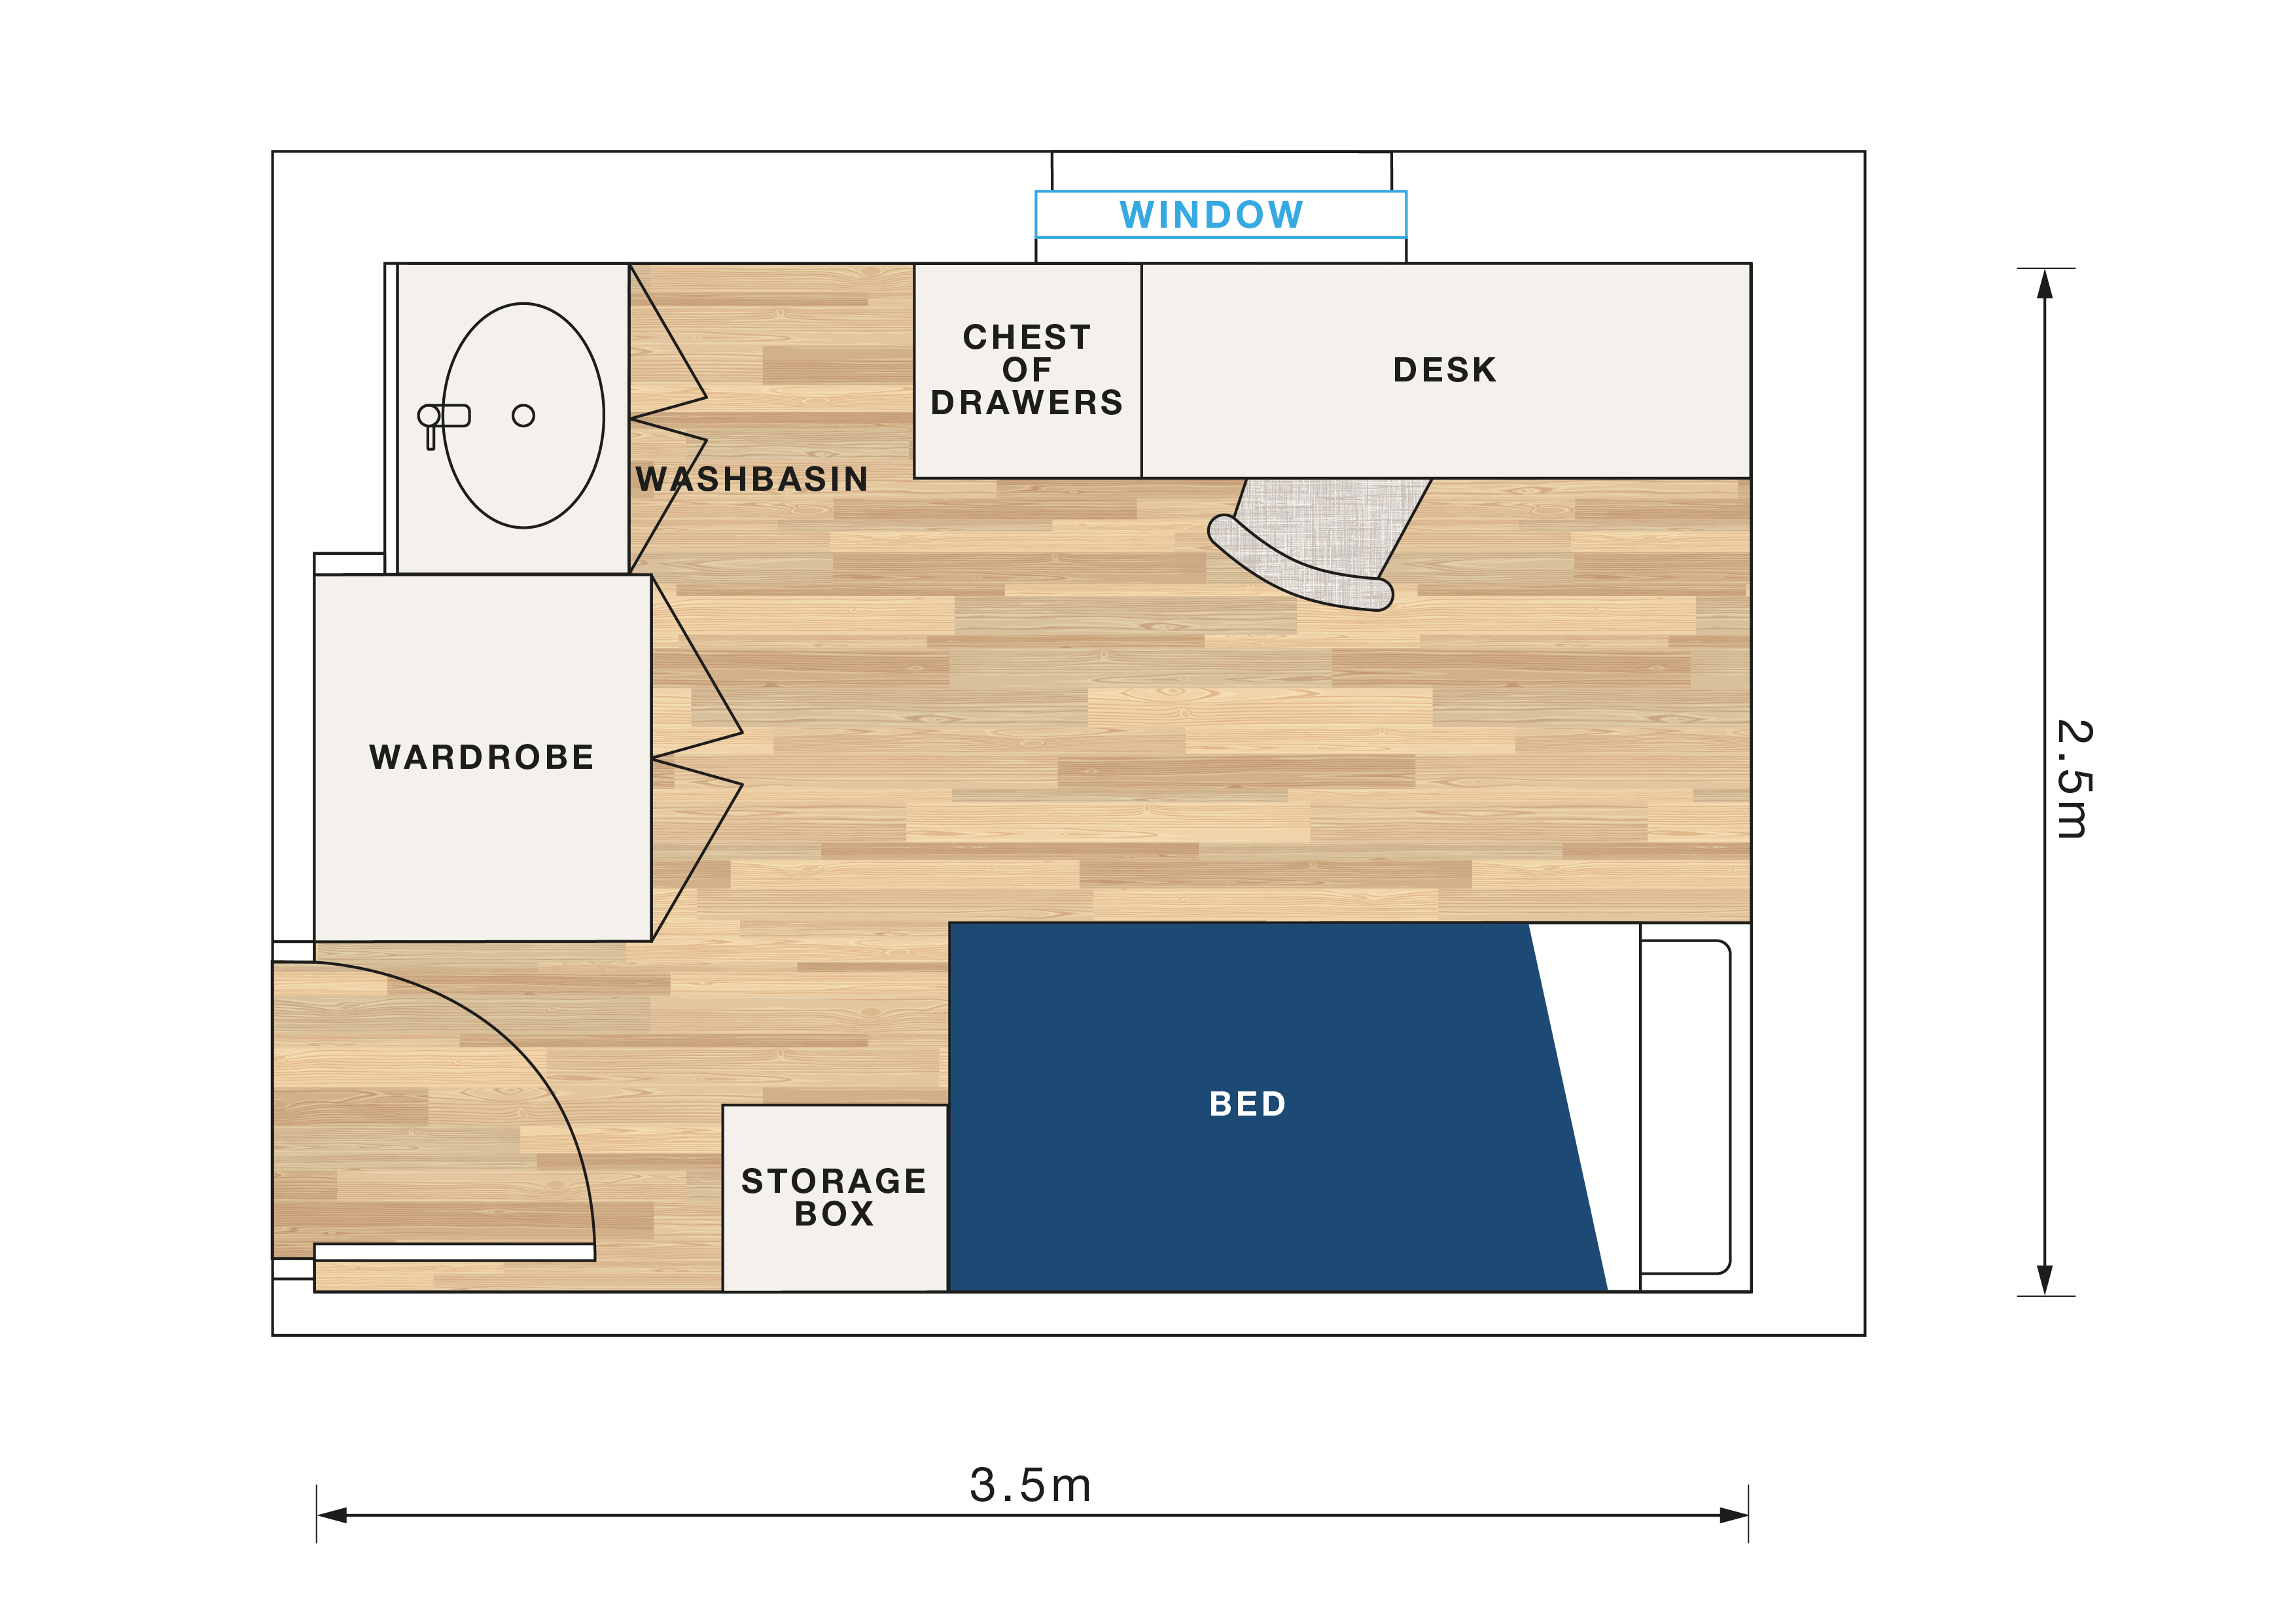 A floor plan for a standard bedroom in Eastwood Terrace with a washbasin